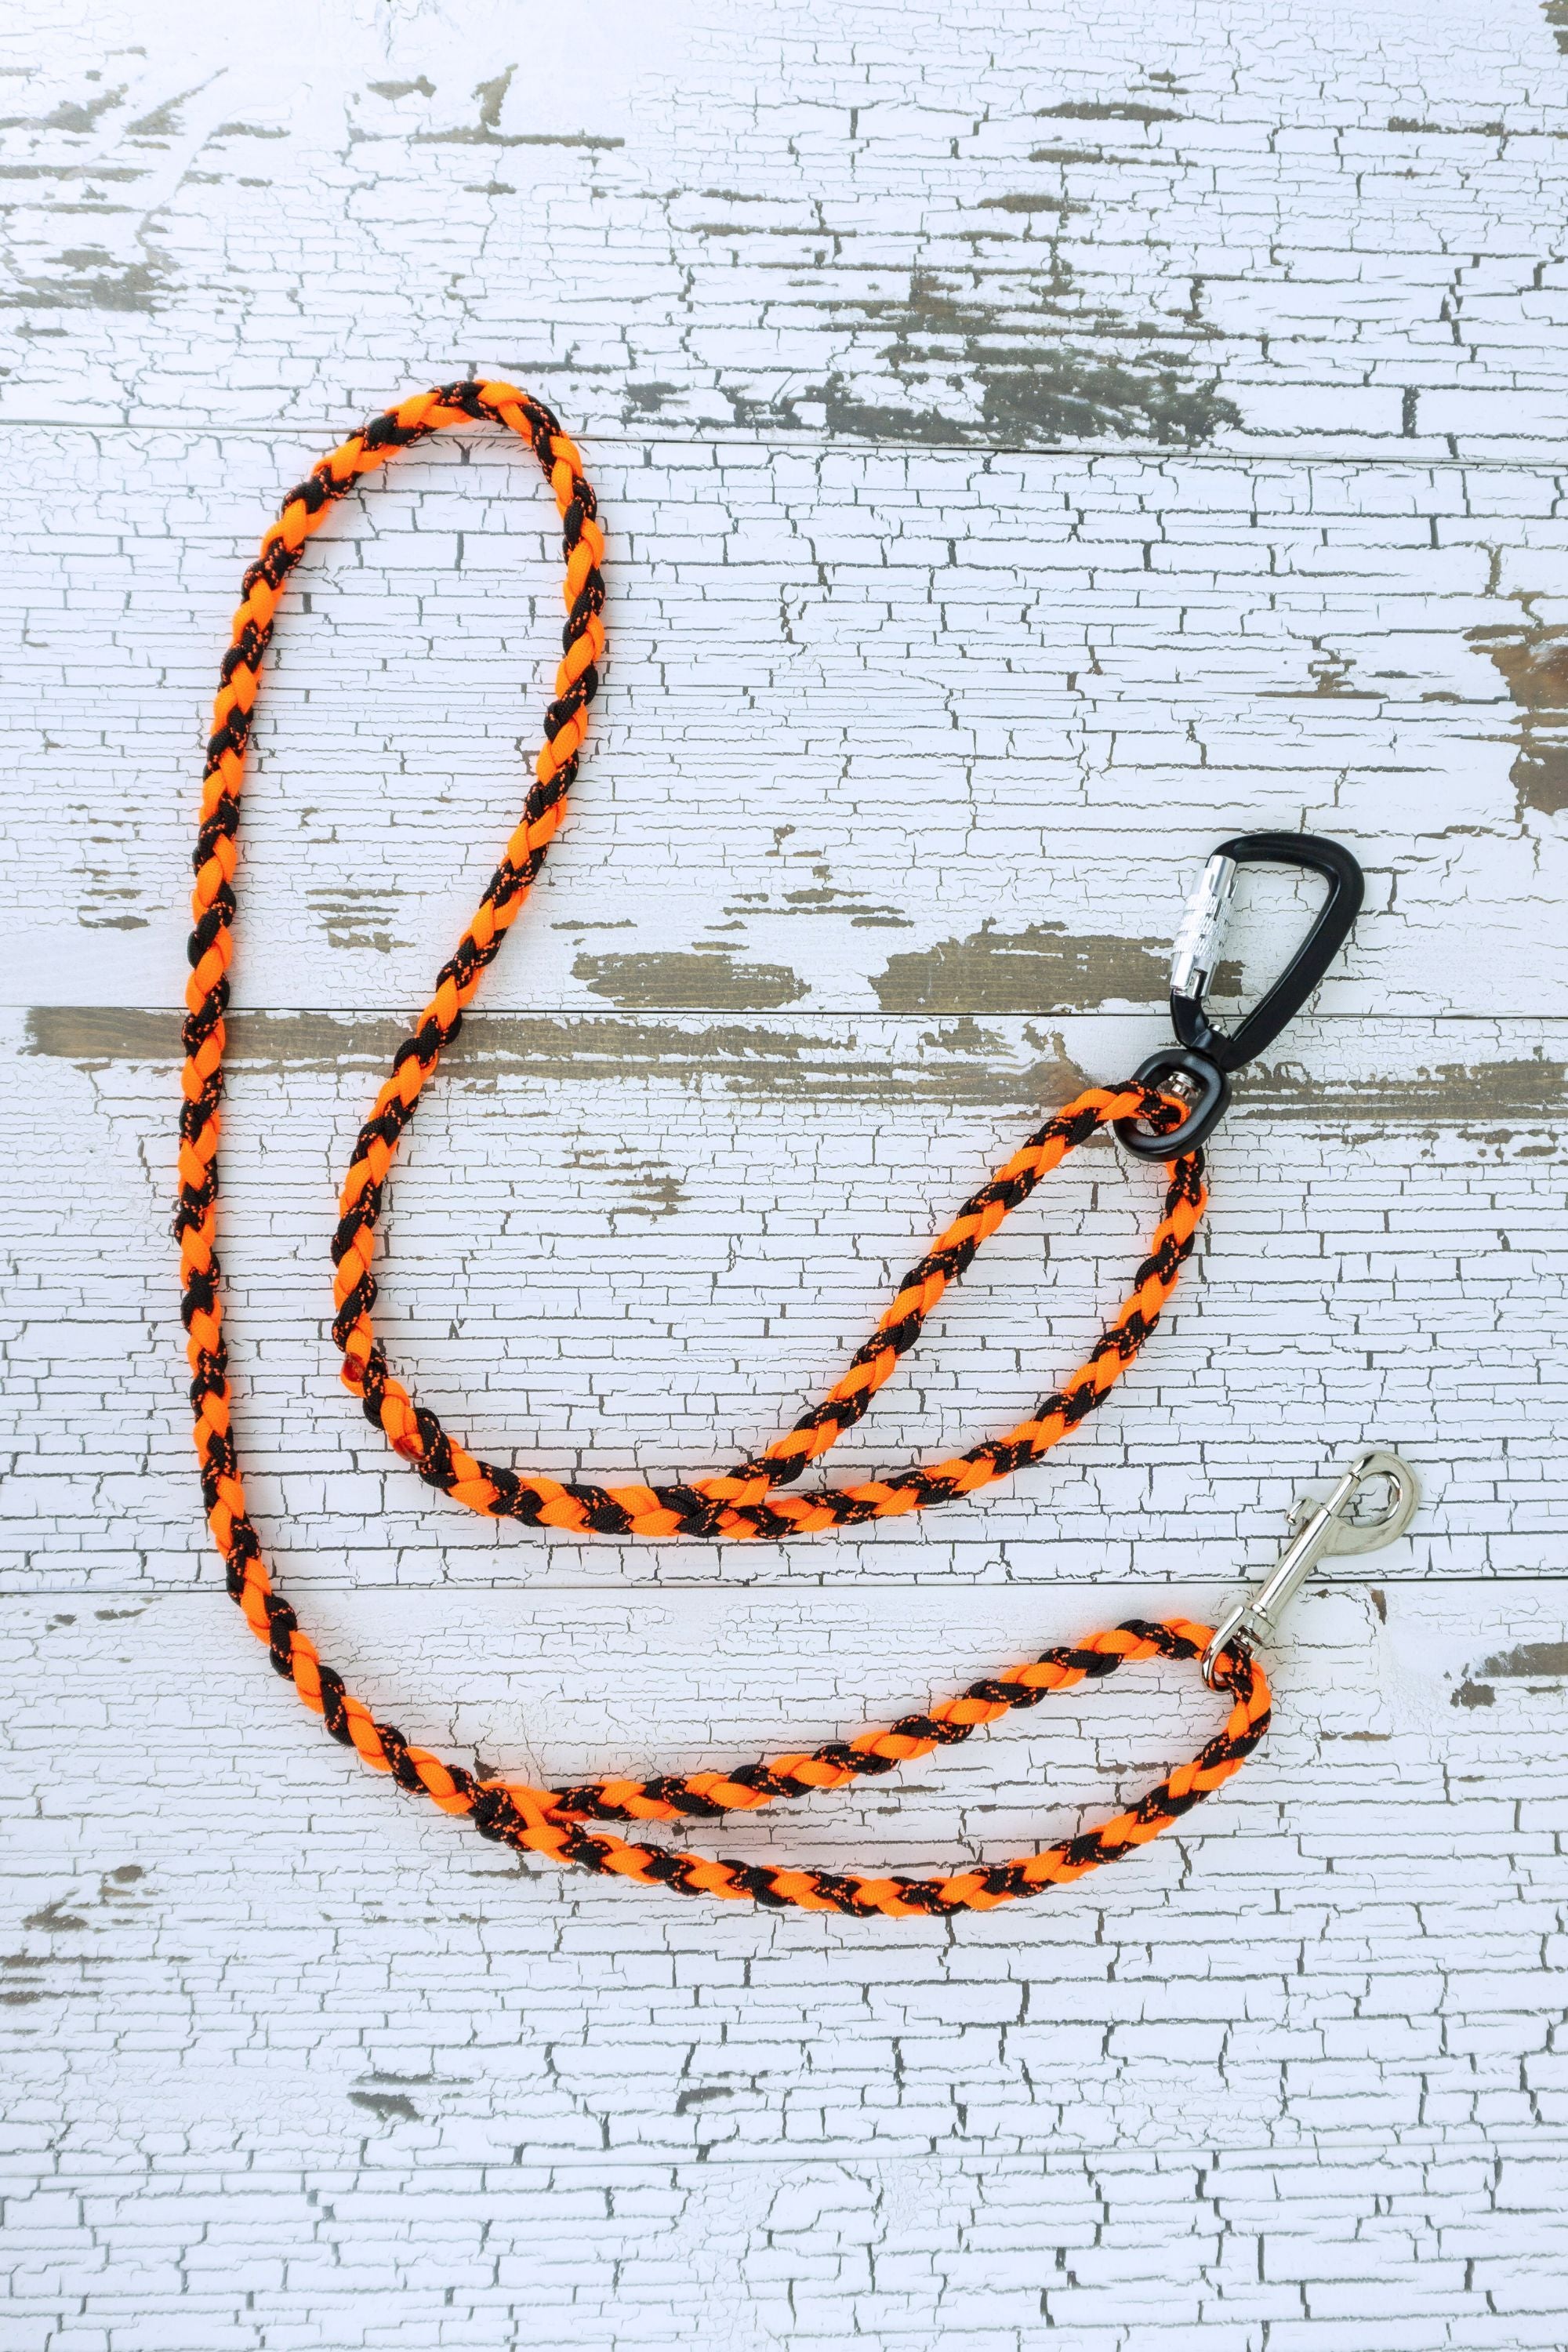 Neon orange and black braided paracord leash in a flat lay, showing loop handles at each end with a auto locking carabiner at one end and a swivel snap bolt at the other end.